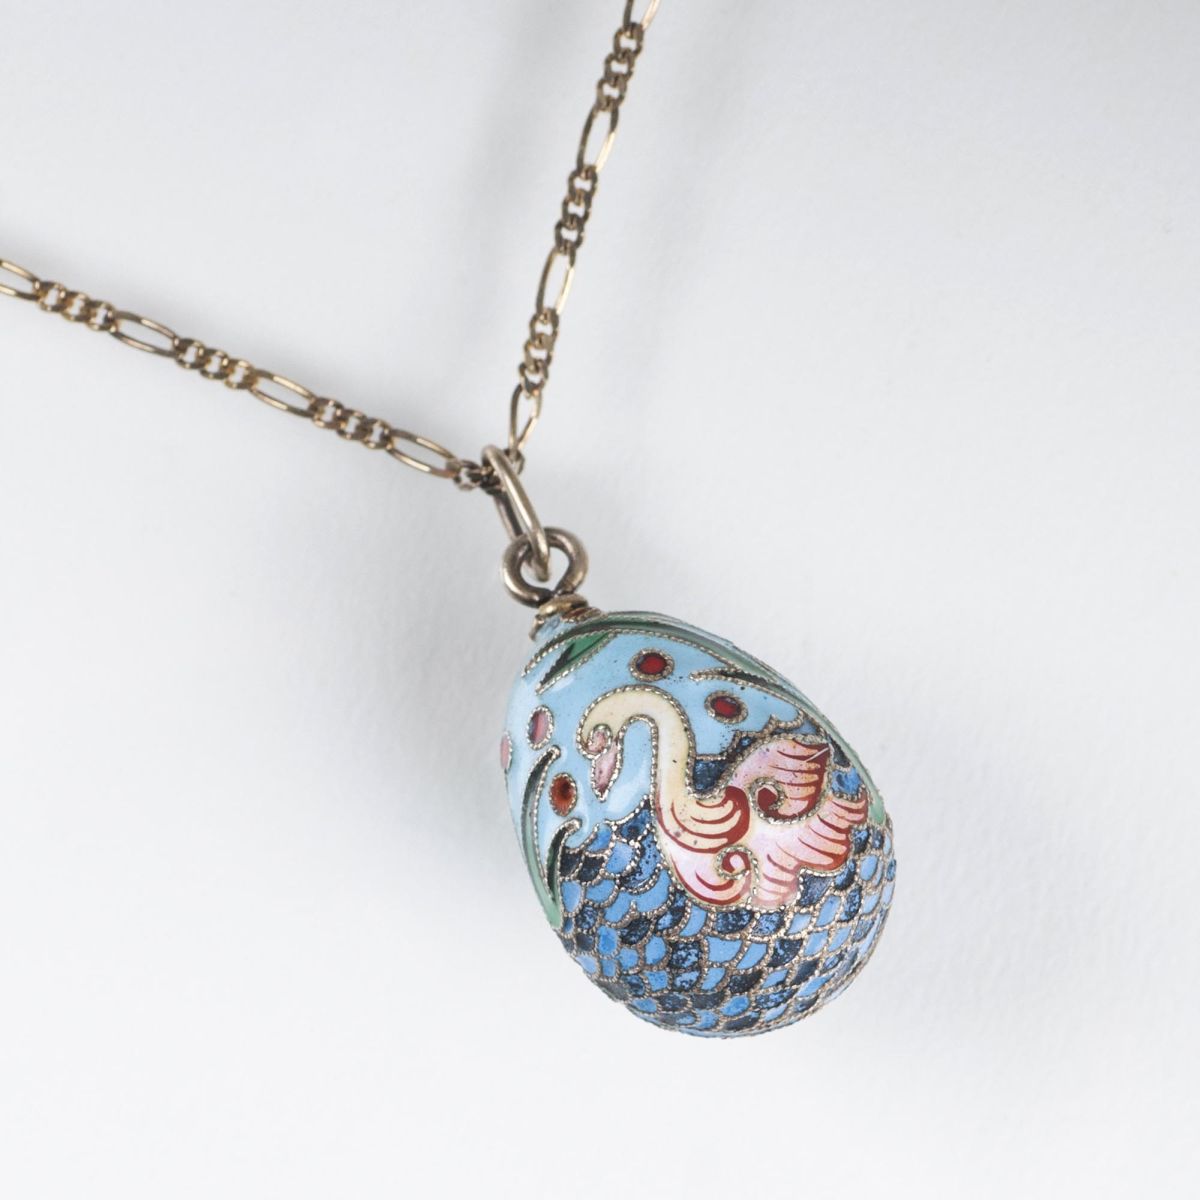 An Easteregg Pendant with coloured Cloisonné Ornaments of Swans